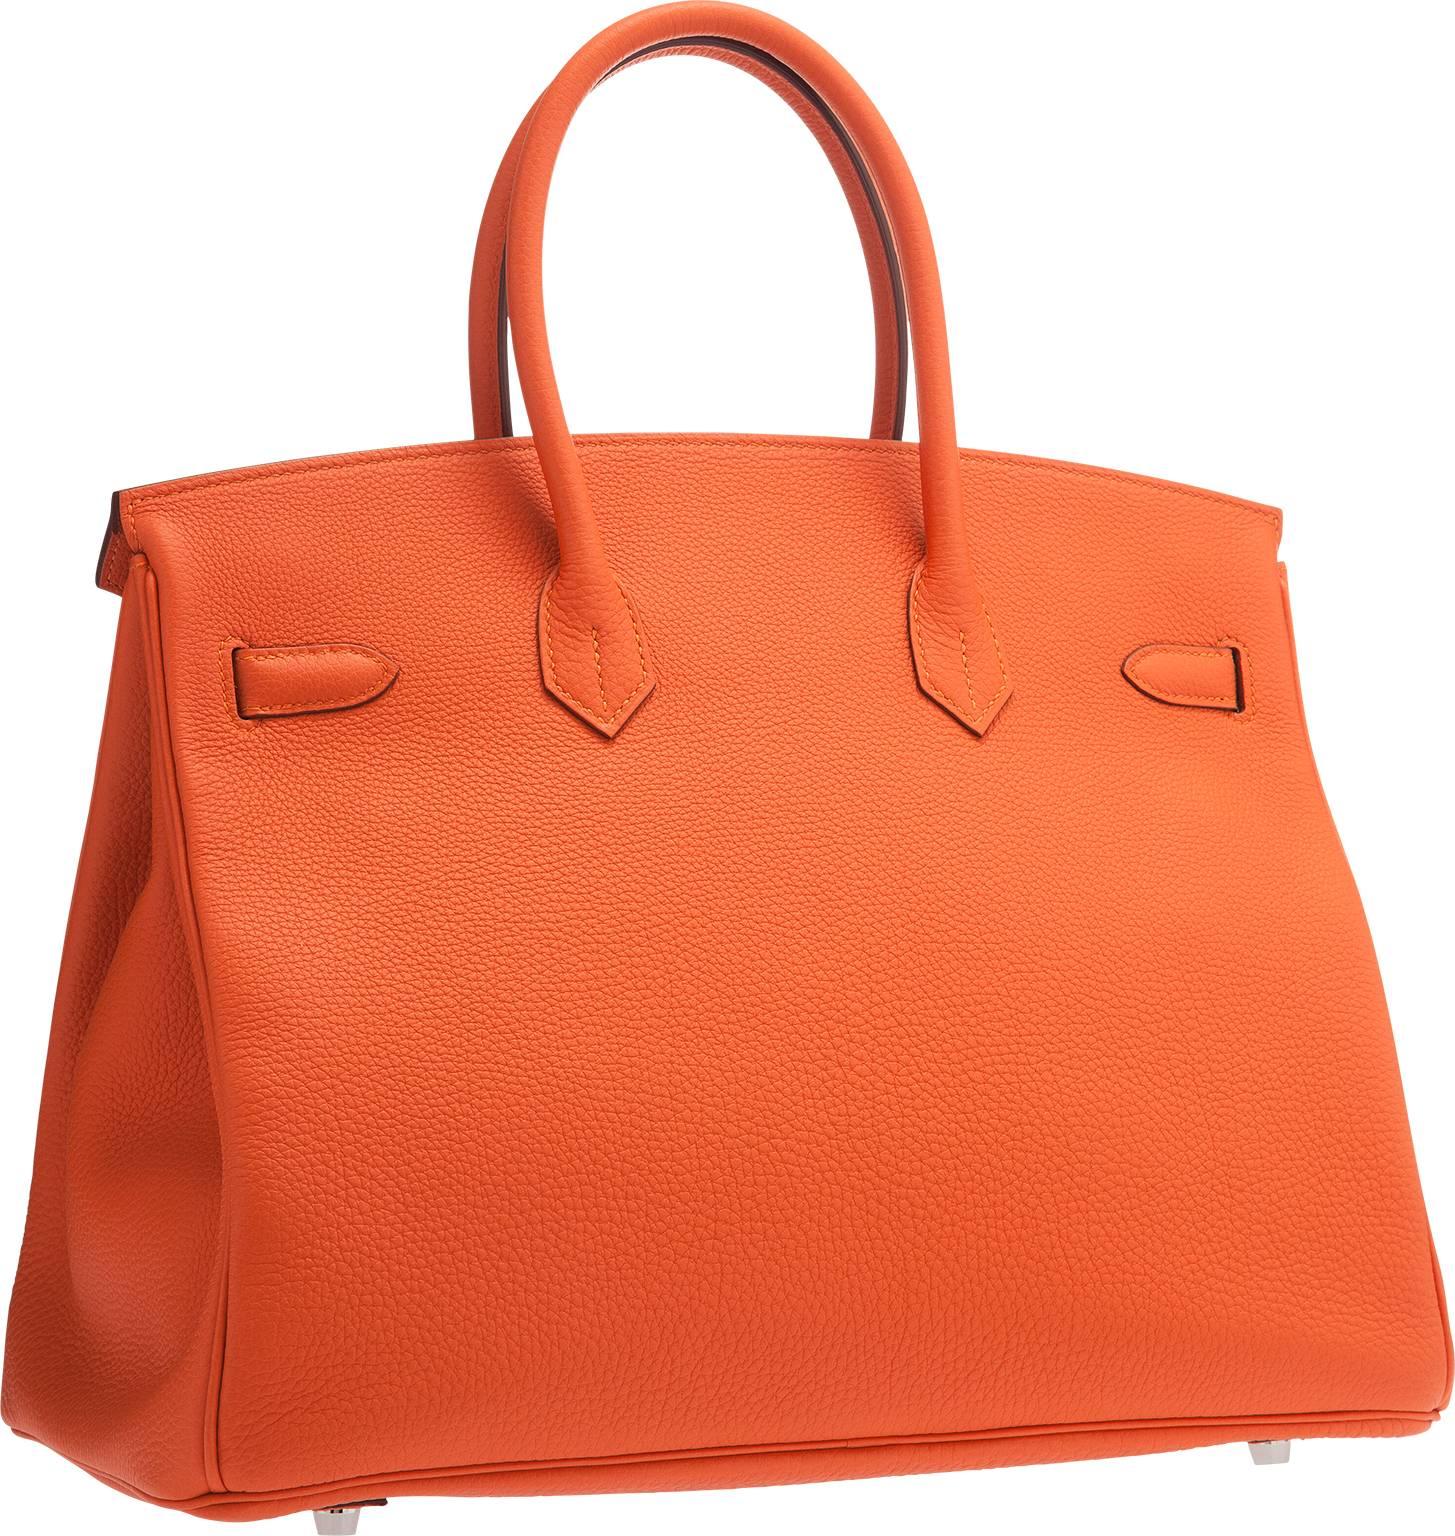 Hermes 35cm Orange Poppy Togo Leather Birkin Bag with Palladium Hardware In New Condition For Sale In New York, NY